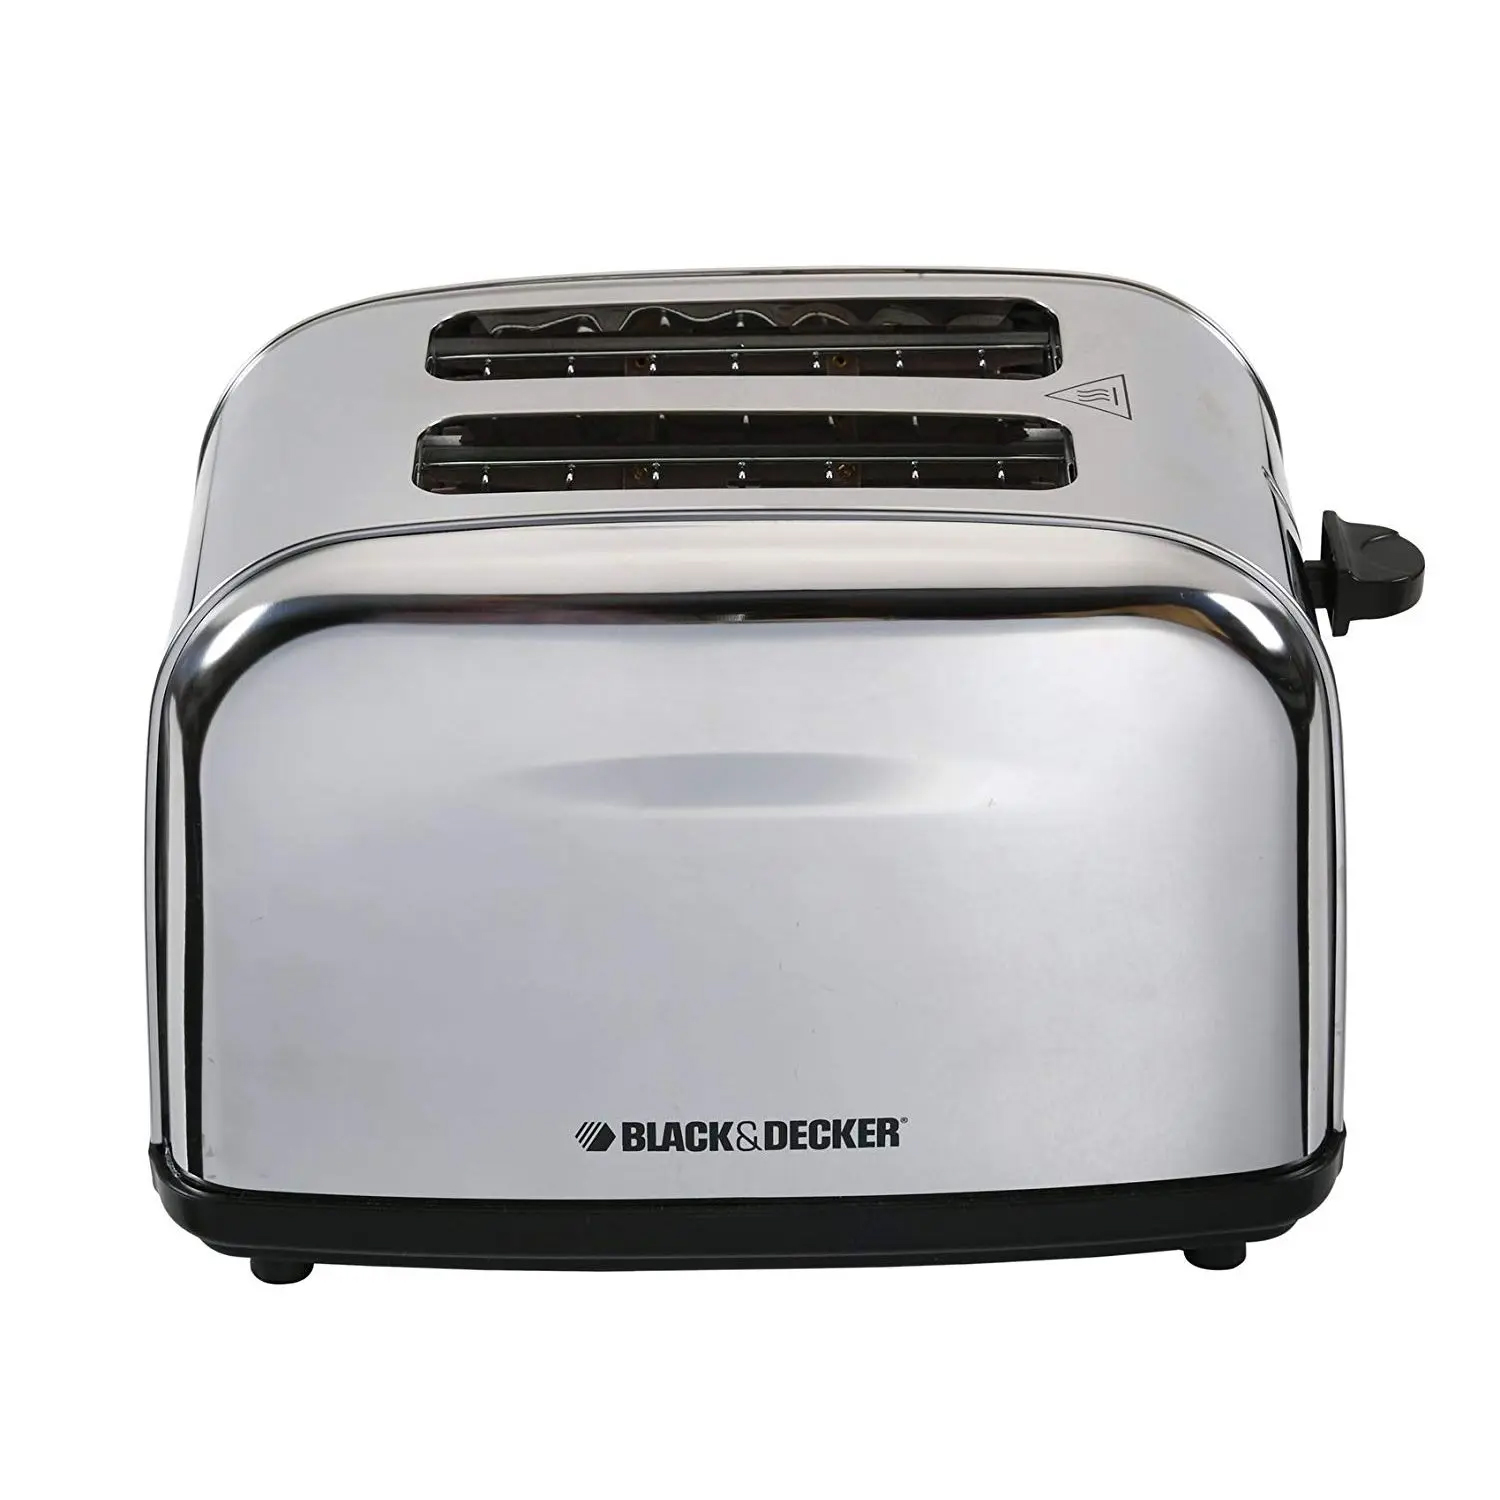 https://aghezty.com/en/products/Toaster/BLACK-DECKER-Cool-Touch-Toaster4-Slices1350-WattWhite-ET124-3350/uploads/product/2021-06-30/36.jpg